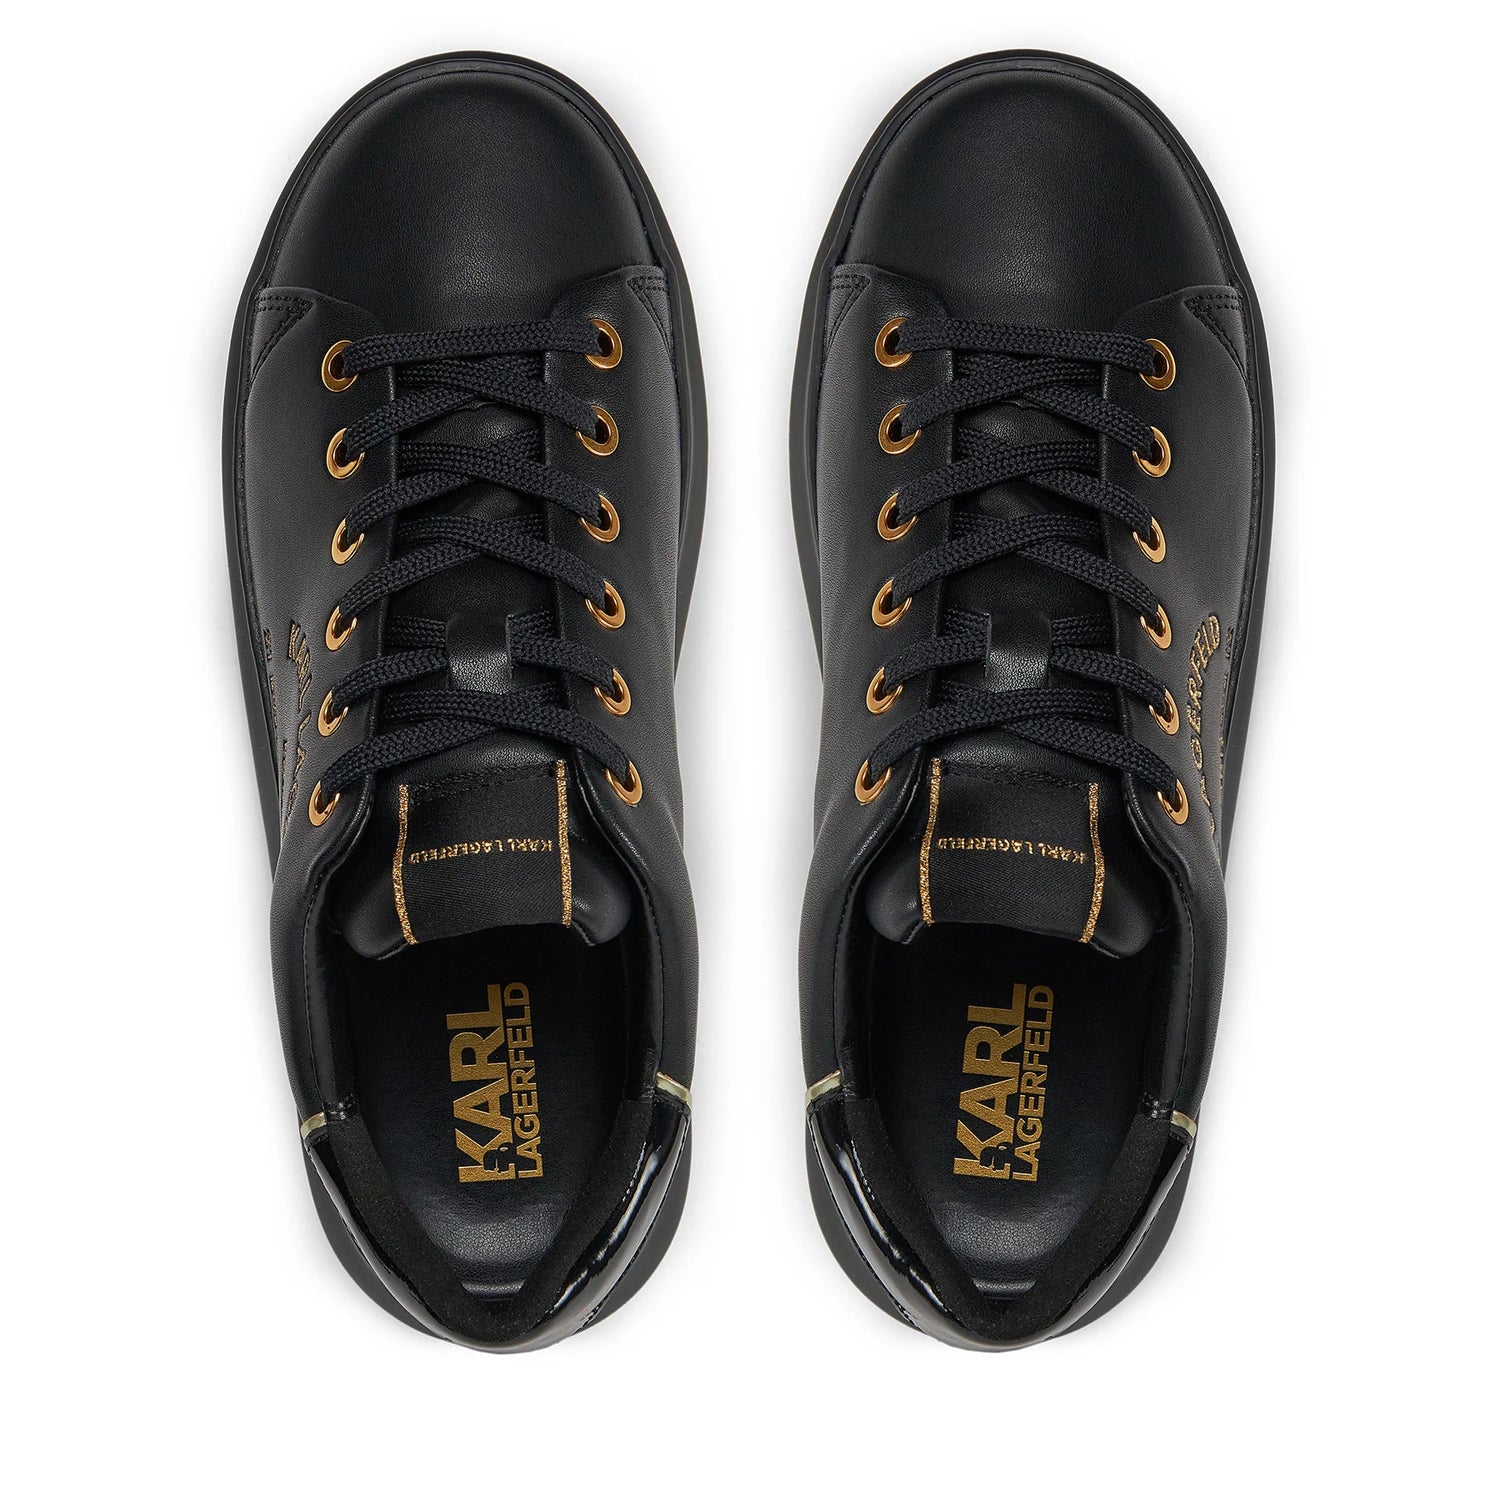 Karl Lagerfeld Sapatilhas Sneakers Shoes Kl62539f Blk Gold Preto Ouro_shot4